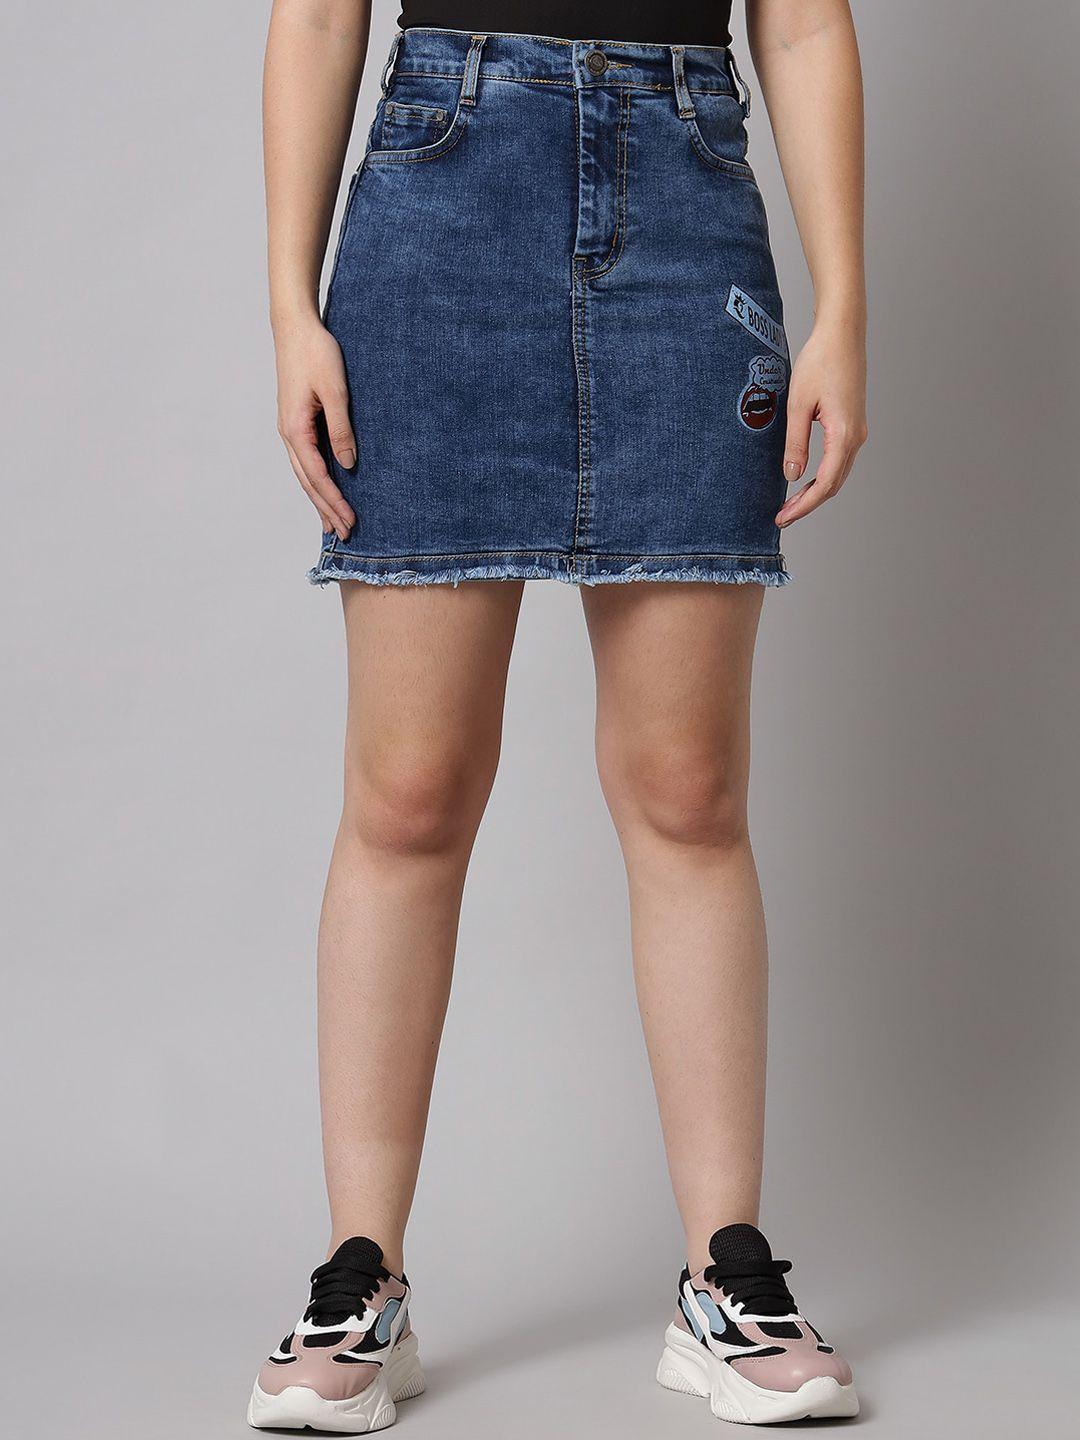 the-dry-state-women-blue-solid-denim-skirts